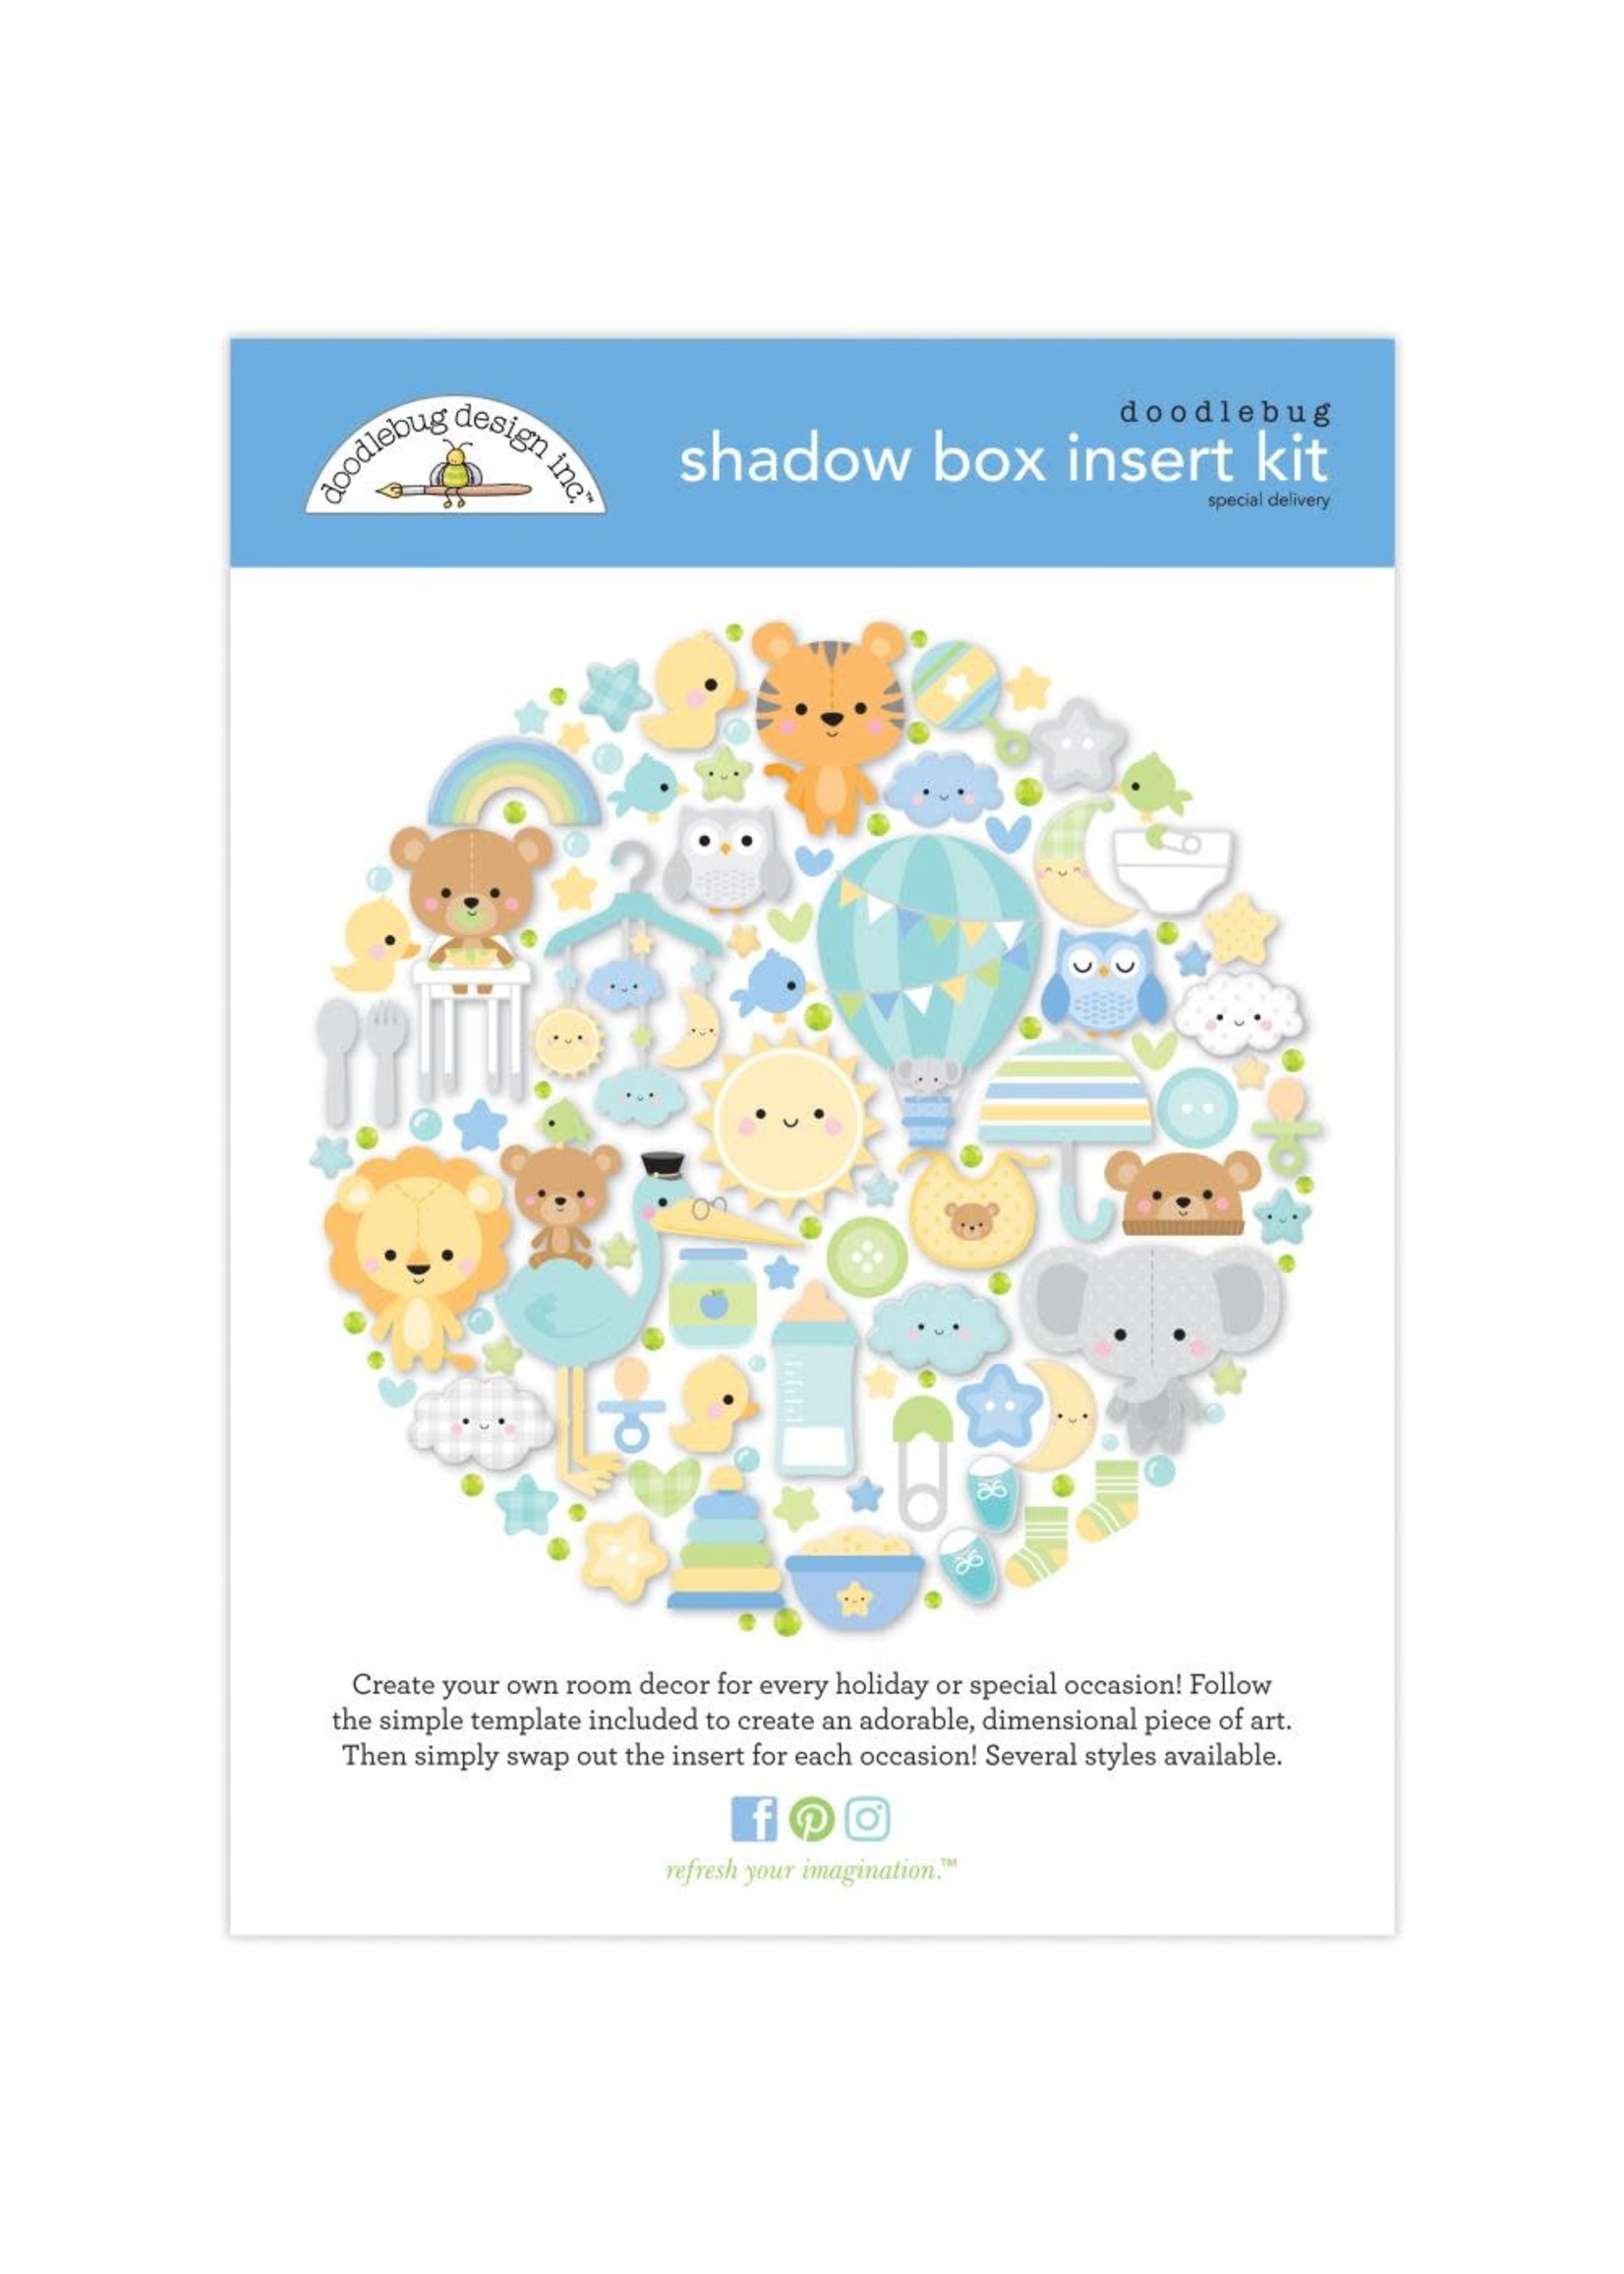 DOODLEBUG Special Delivery Shadow Box Insert Kit